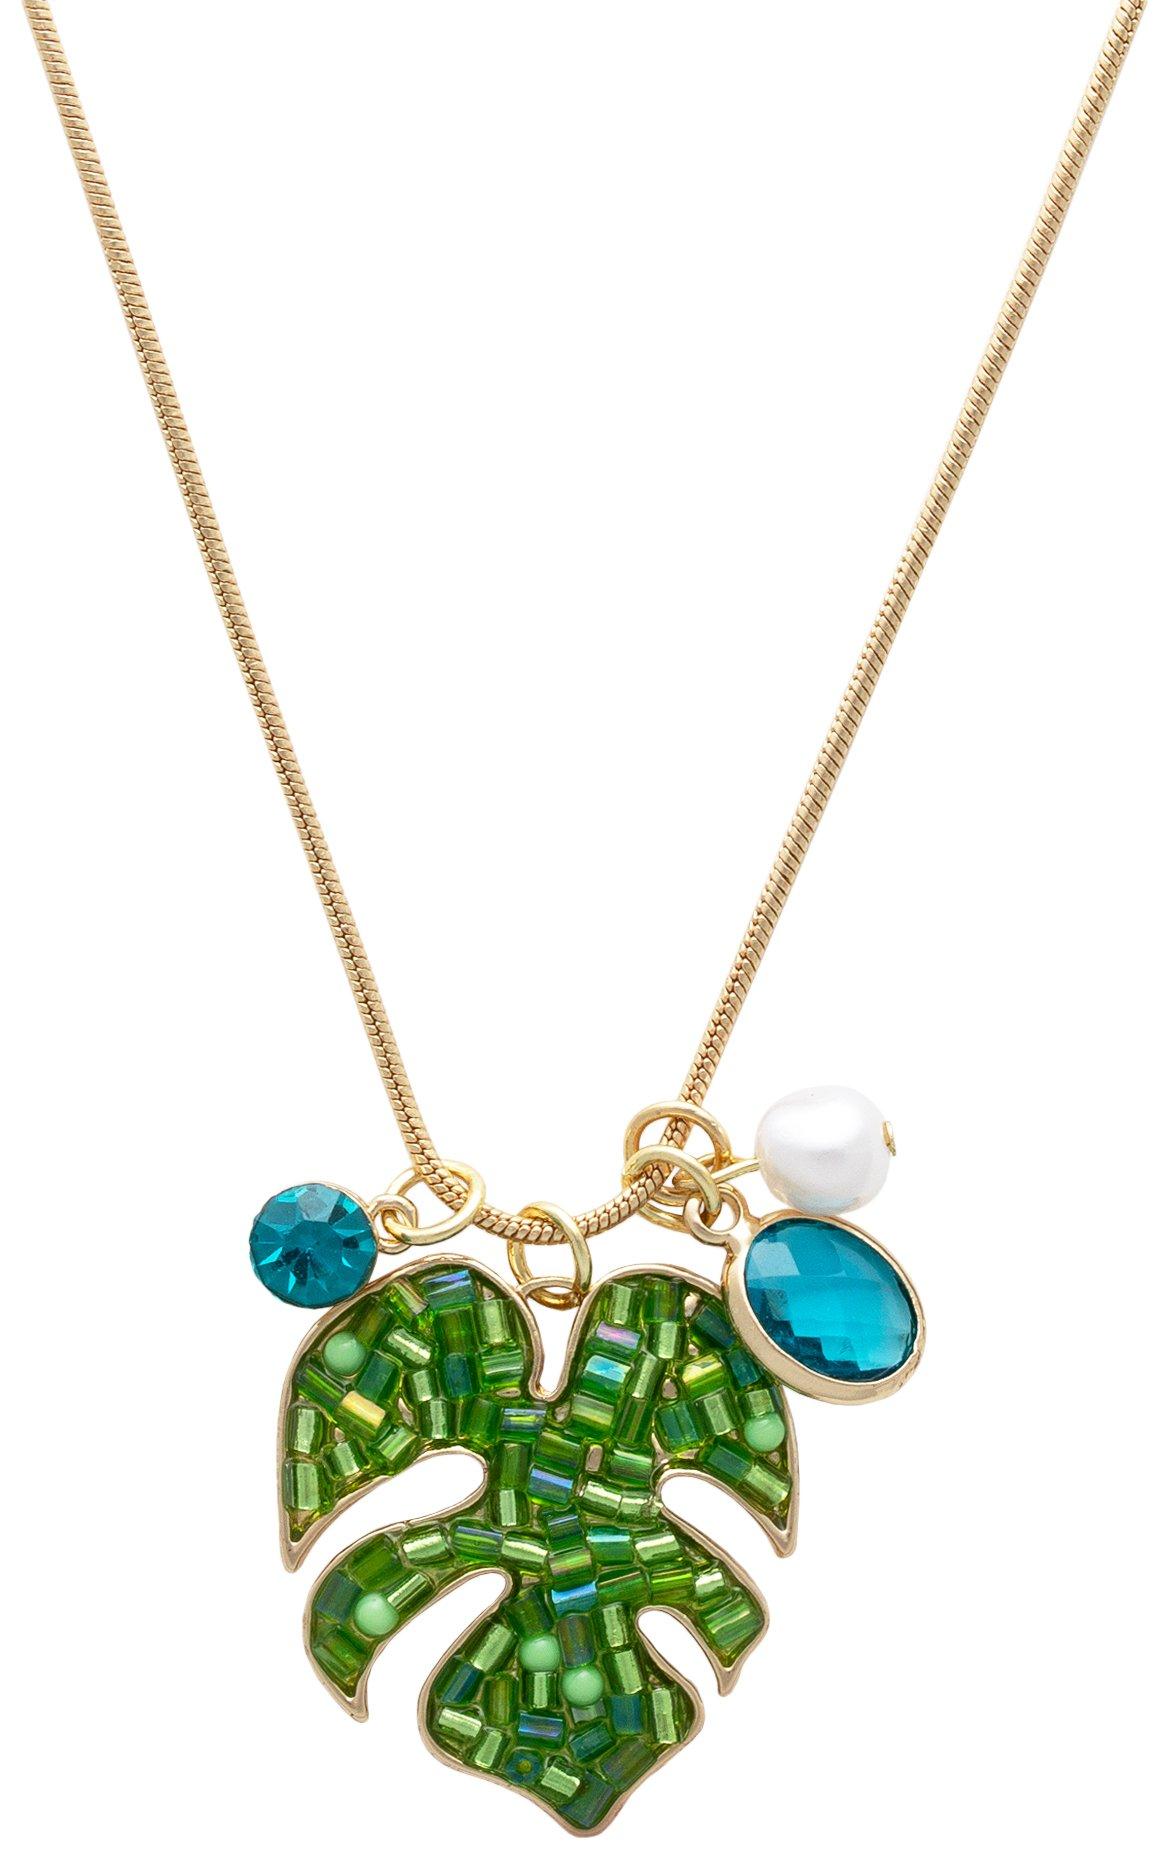 Beach Chic 20 In. Beaded Monstera Leaf Gold Tone Necklace